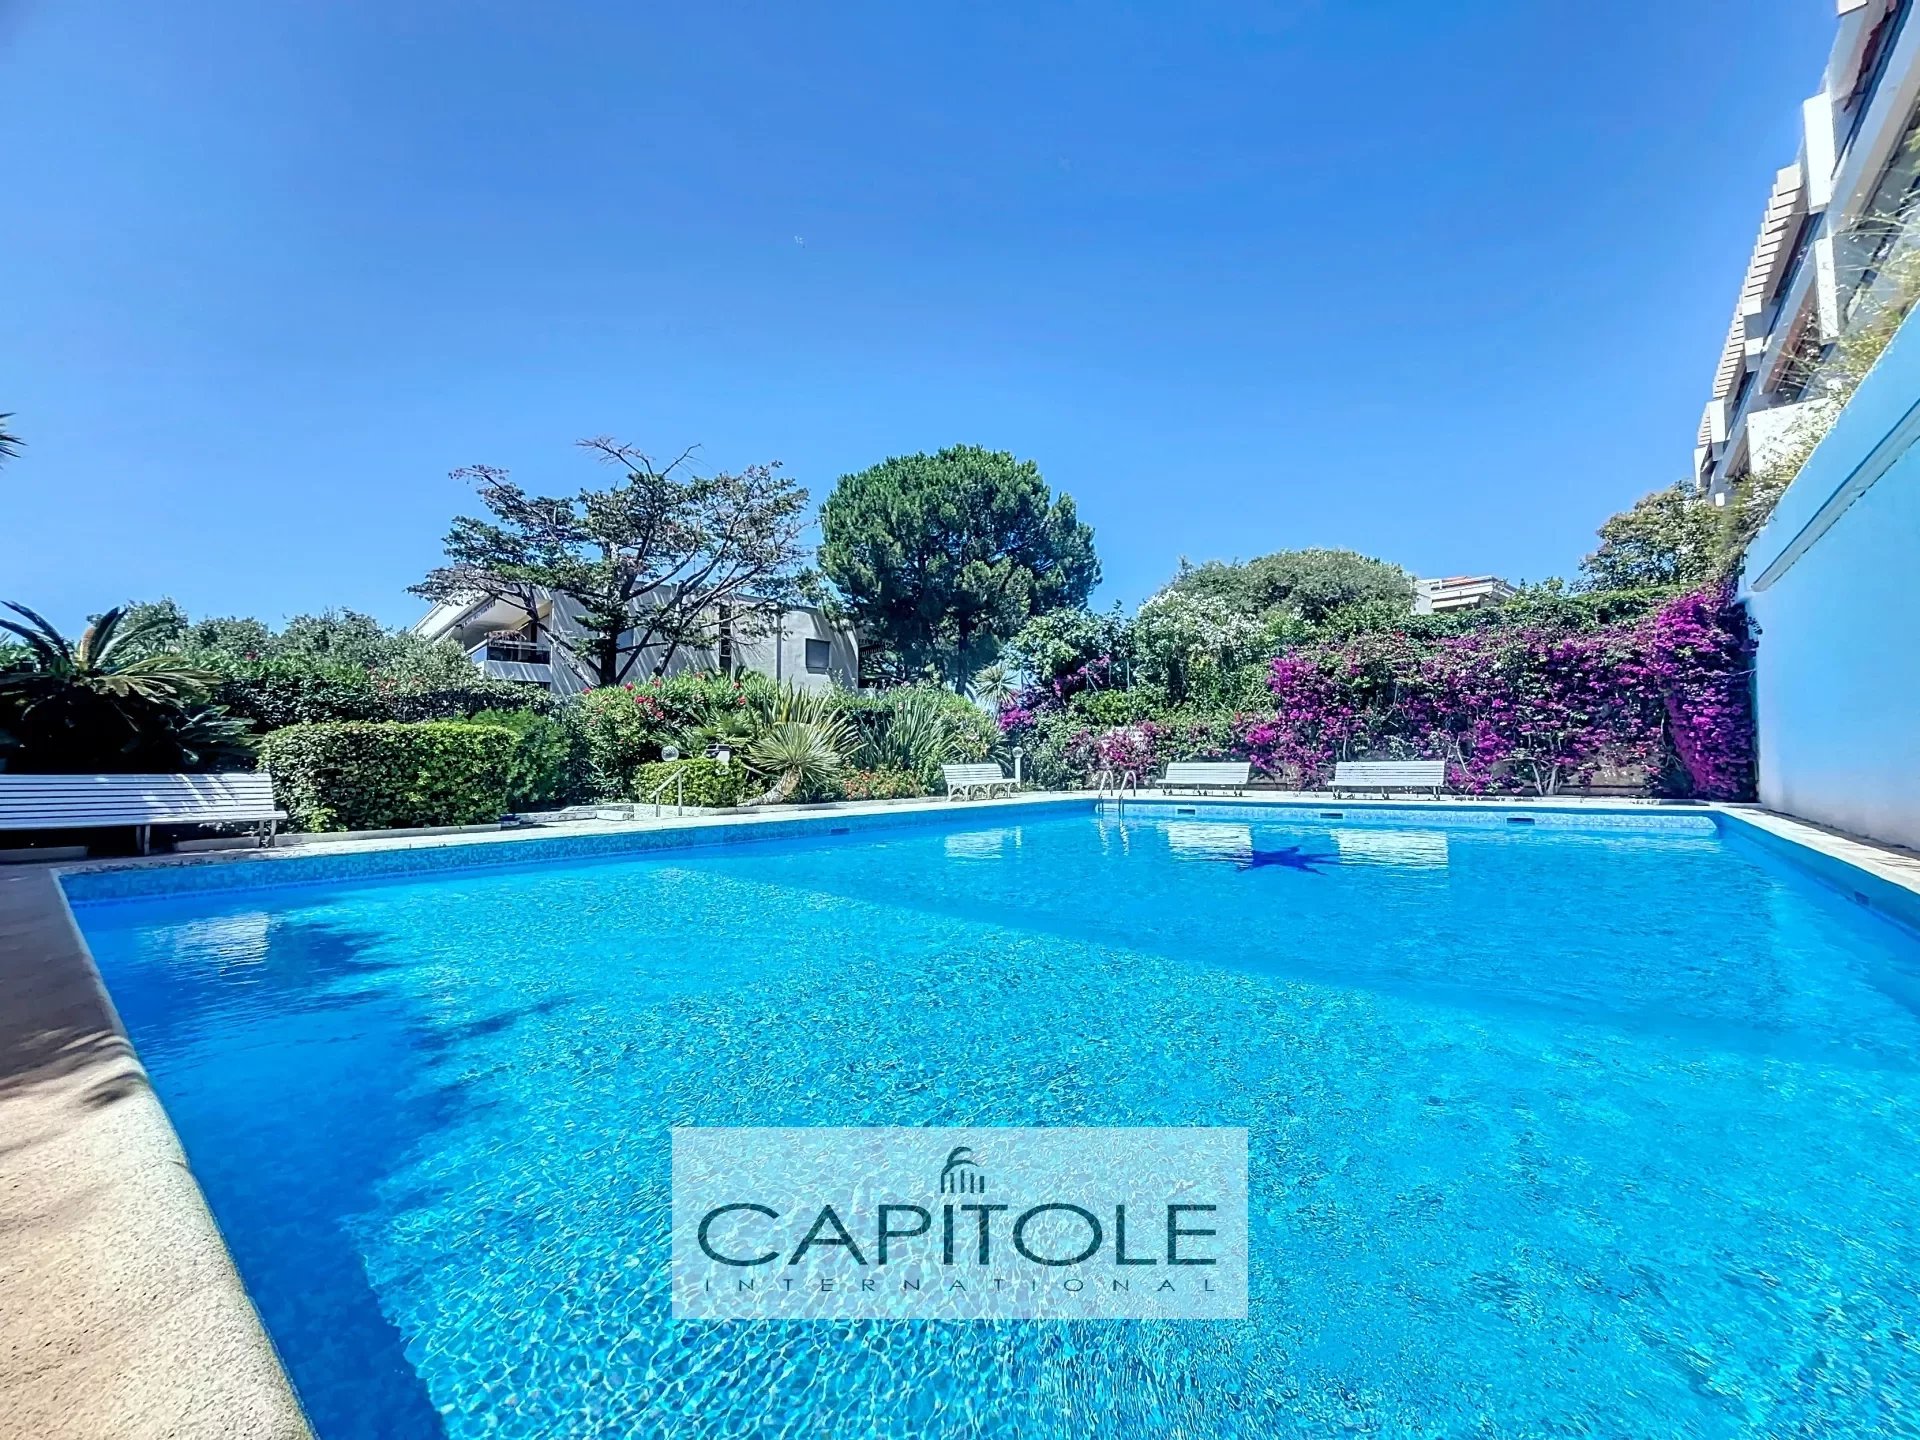 FOR SALE: Rostagne, 2-bedrooms garden-level apartment with pool, double garage, cellar, and concierge.